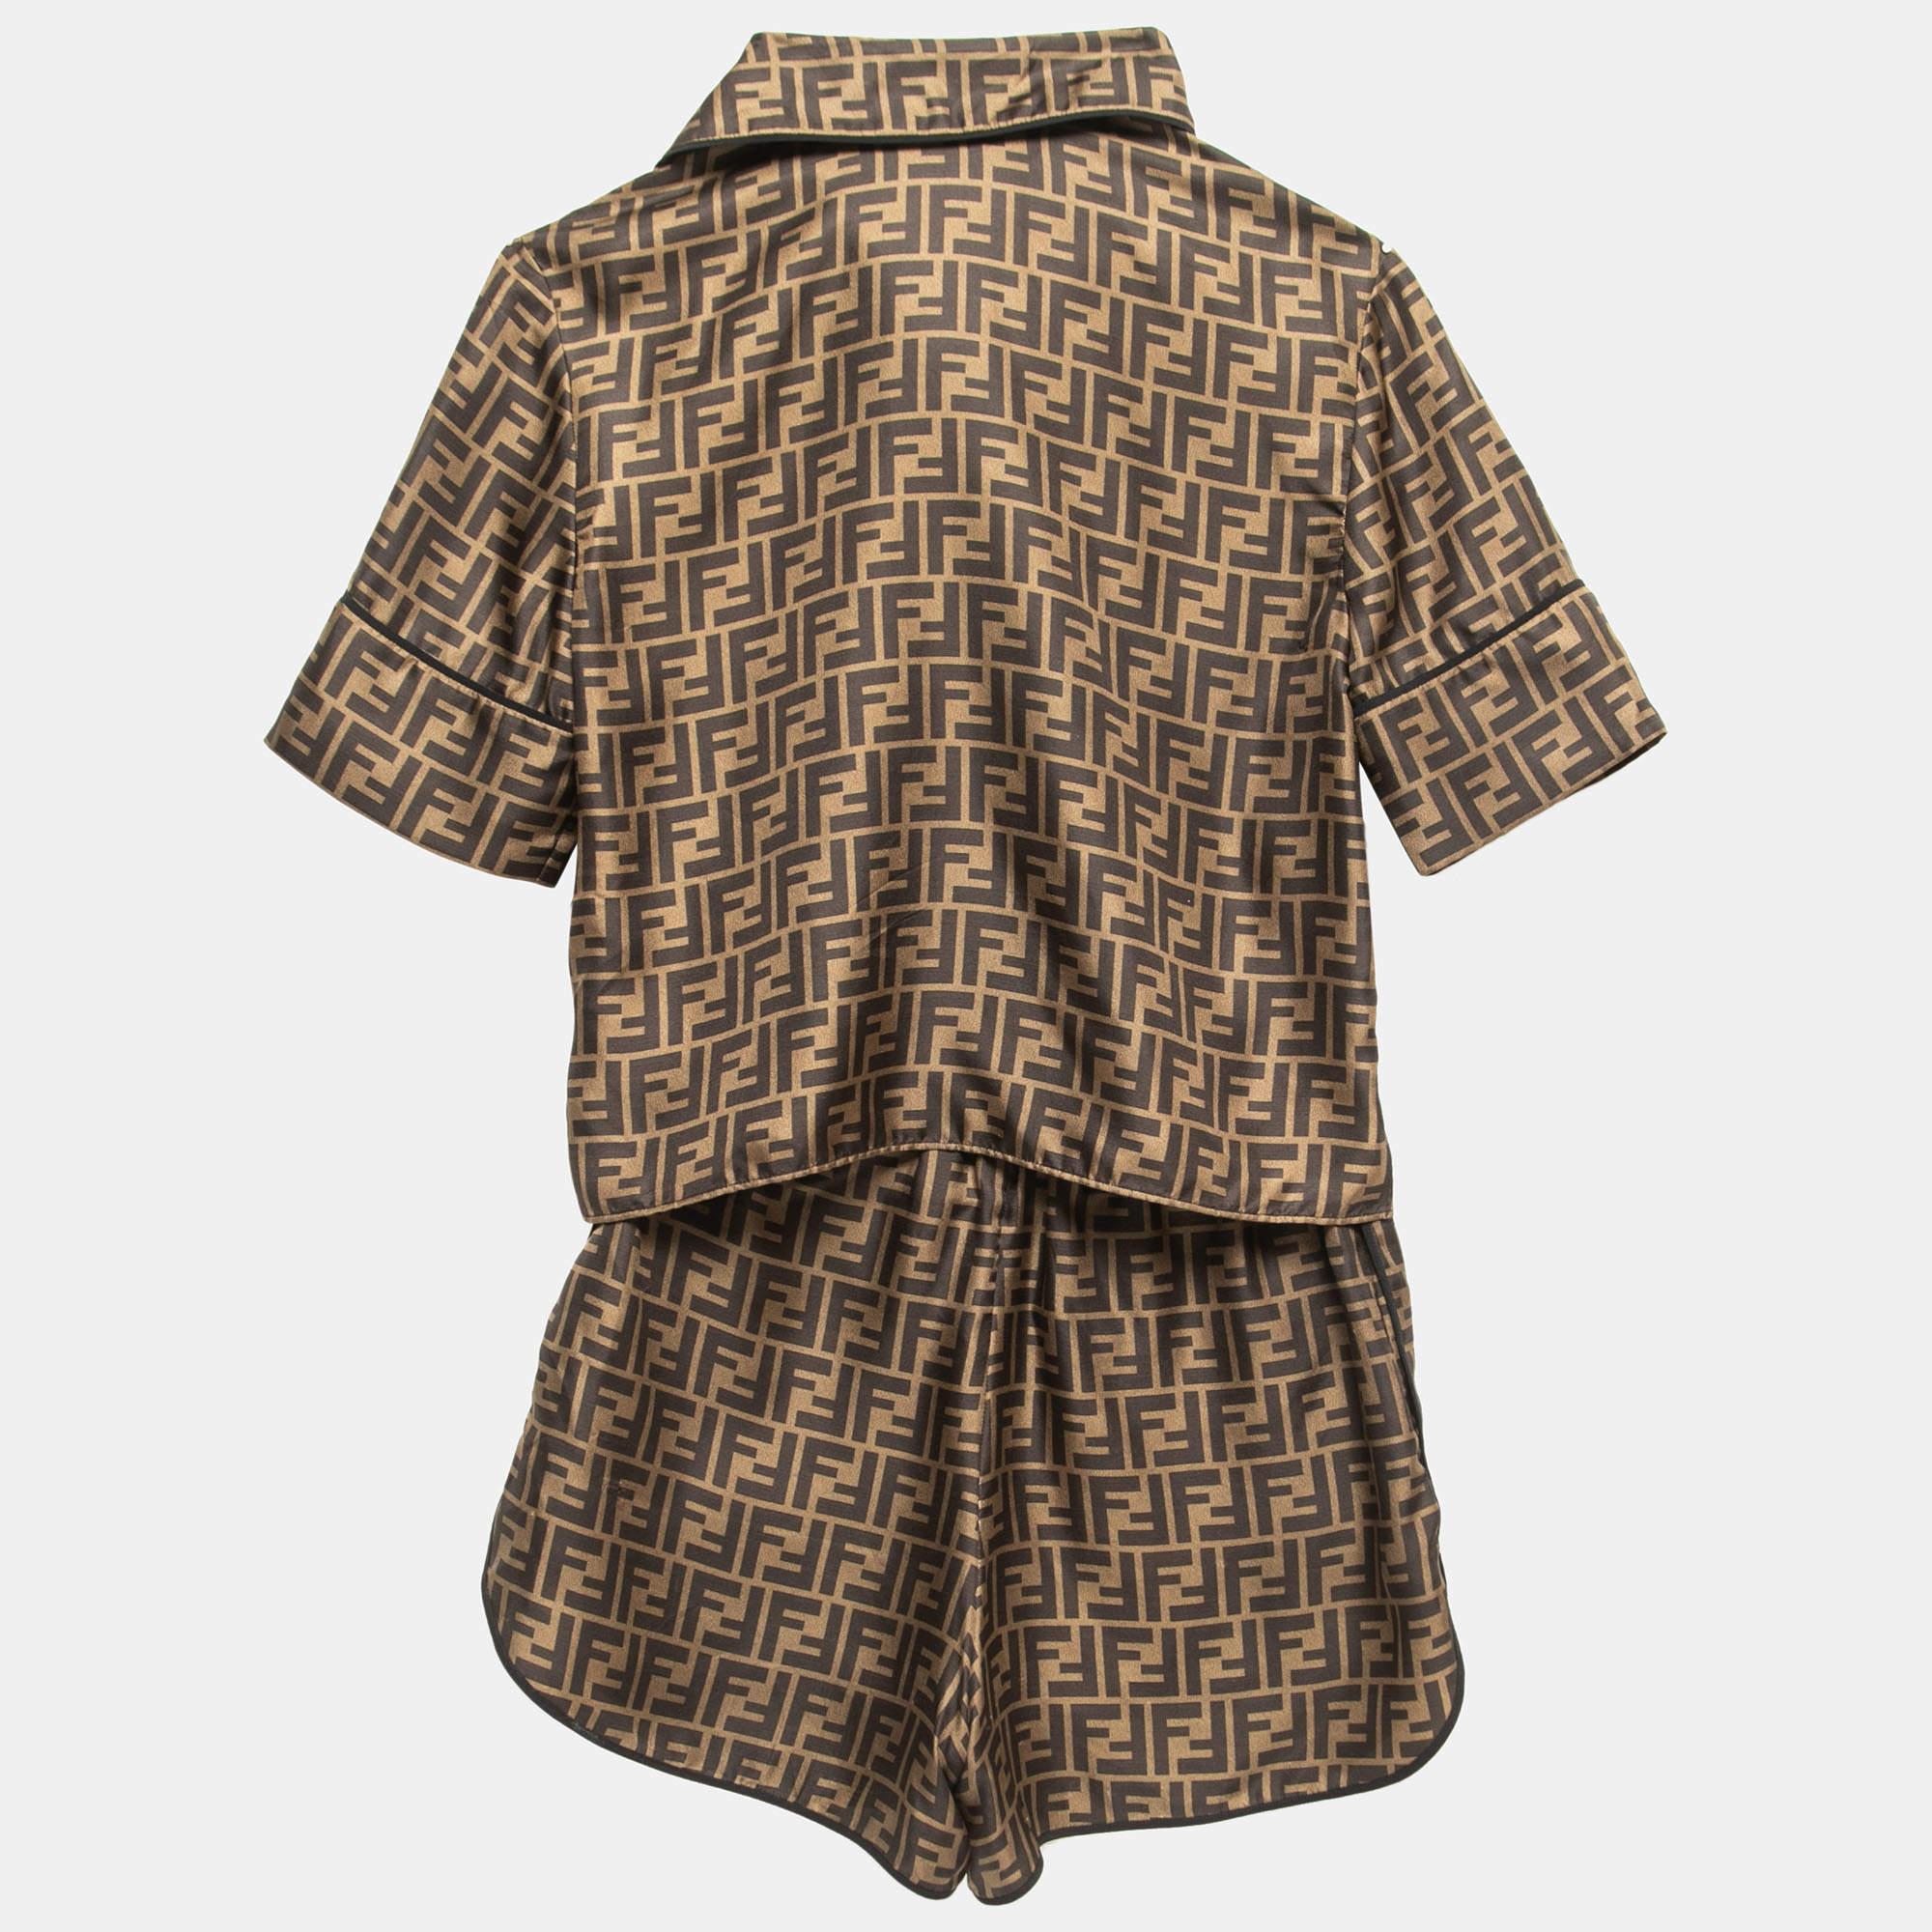 Fendi knows how to keep you comfortable and cozy with this top-pajama suit. Tailored using silk, this suit has the famous Zucca print all over it for a look of luxury.

